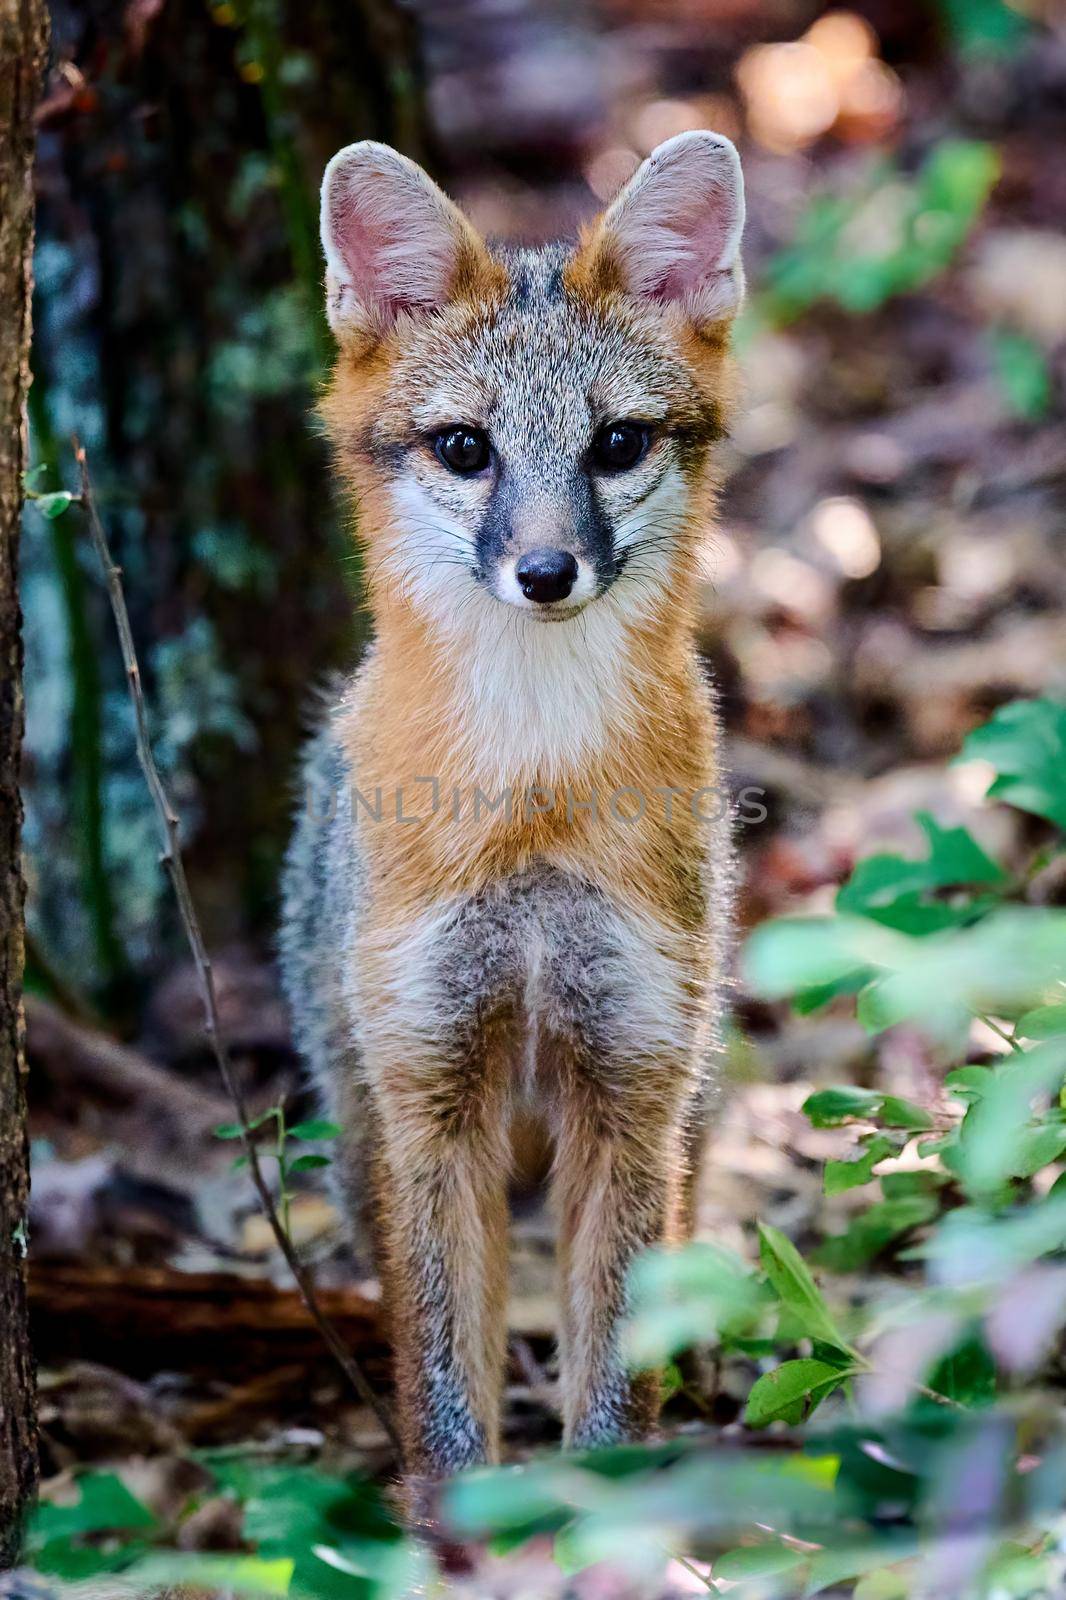 Juvenile Gray Fox Kit (Urocyon cinereoargenteus) in a forest staring at the camera. by patrickstock